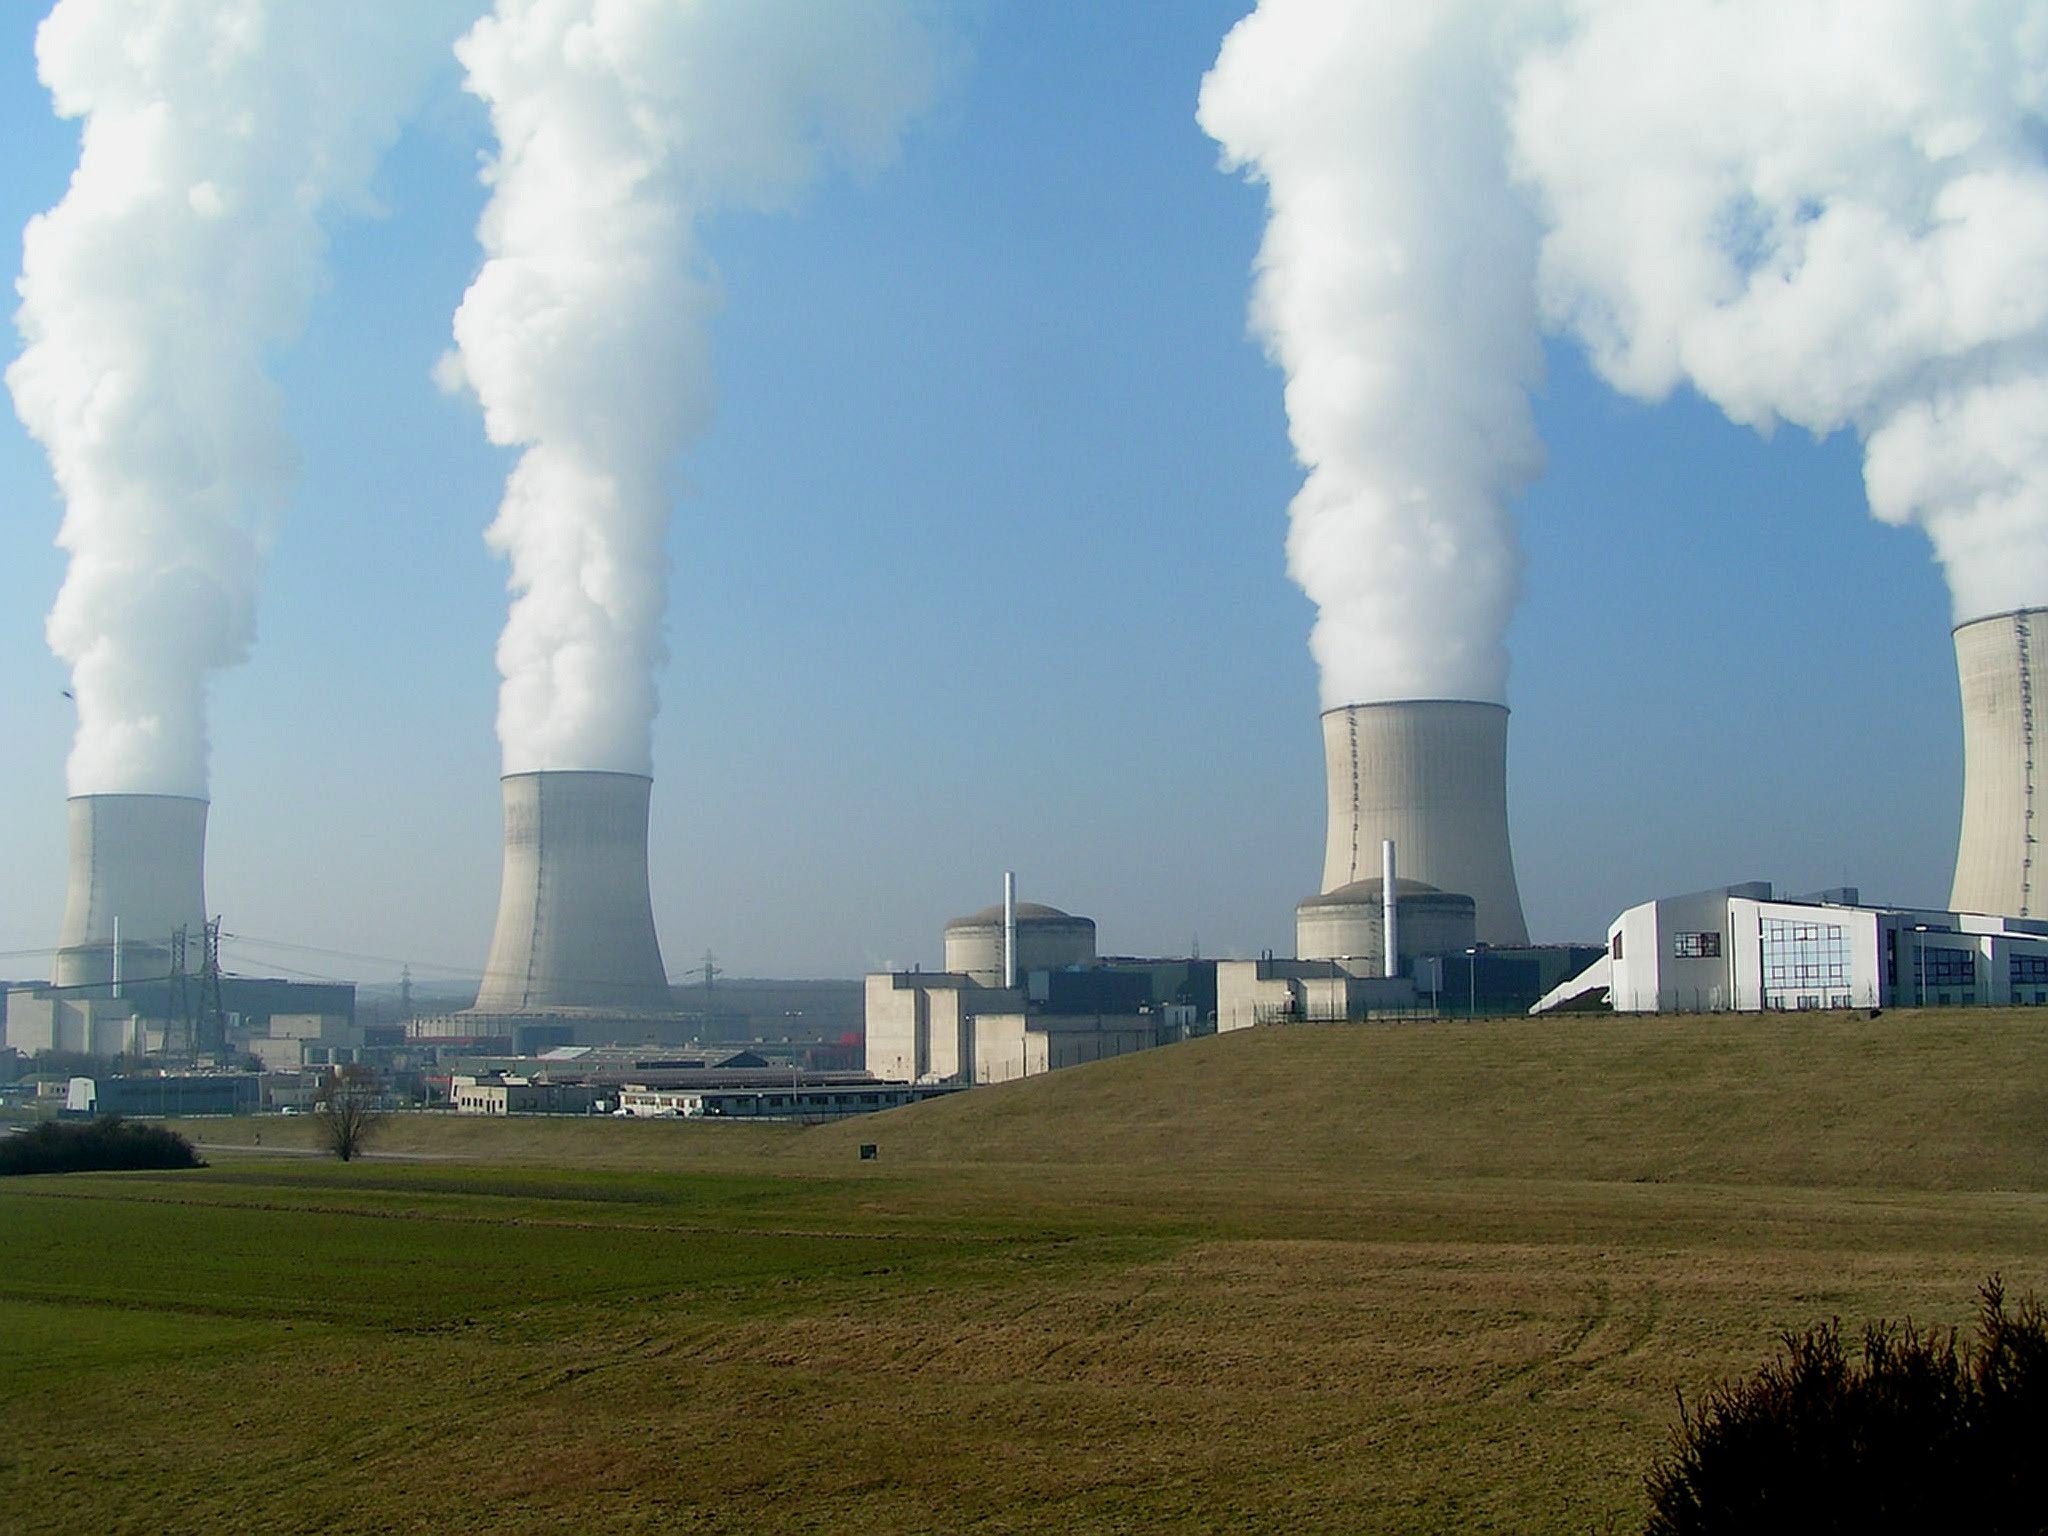 Nuclear Energy Today and Tomorrow : Documentary on the Future of Nuclear Power